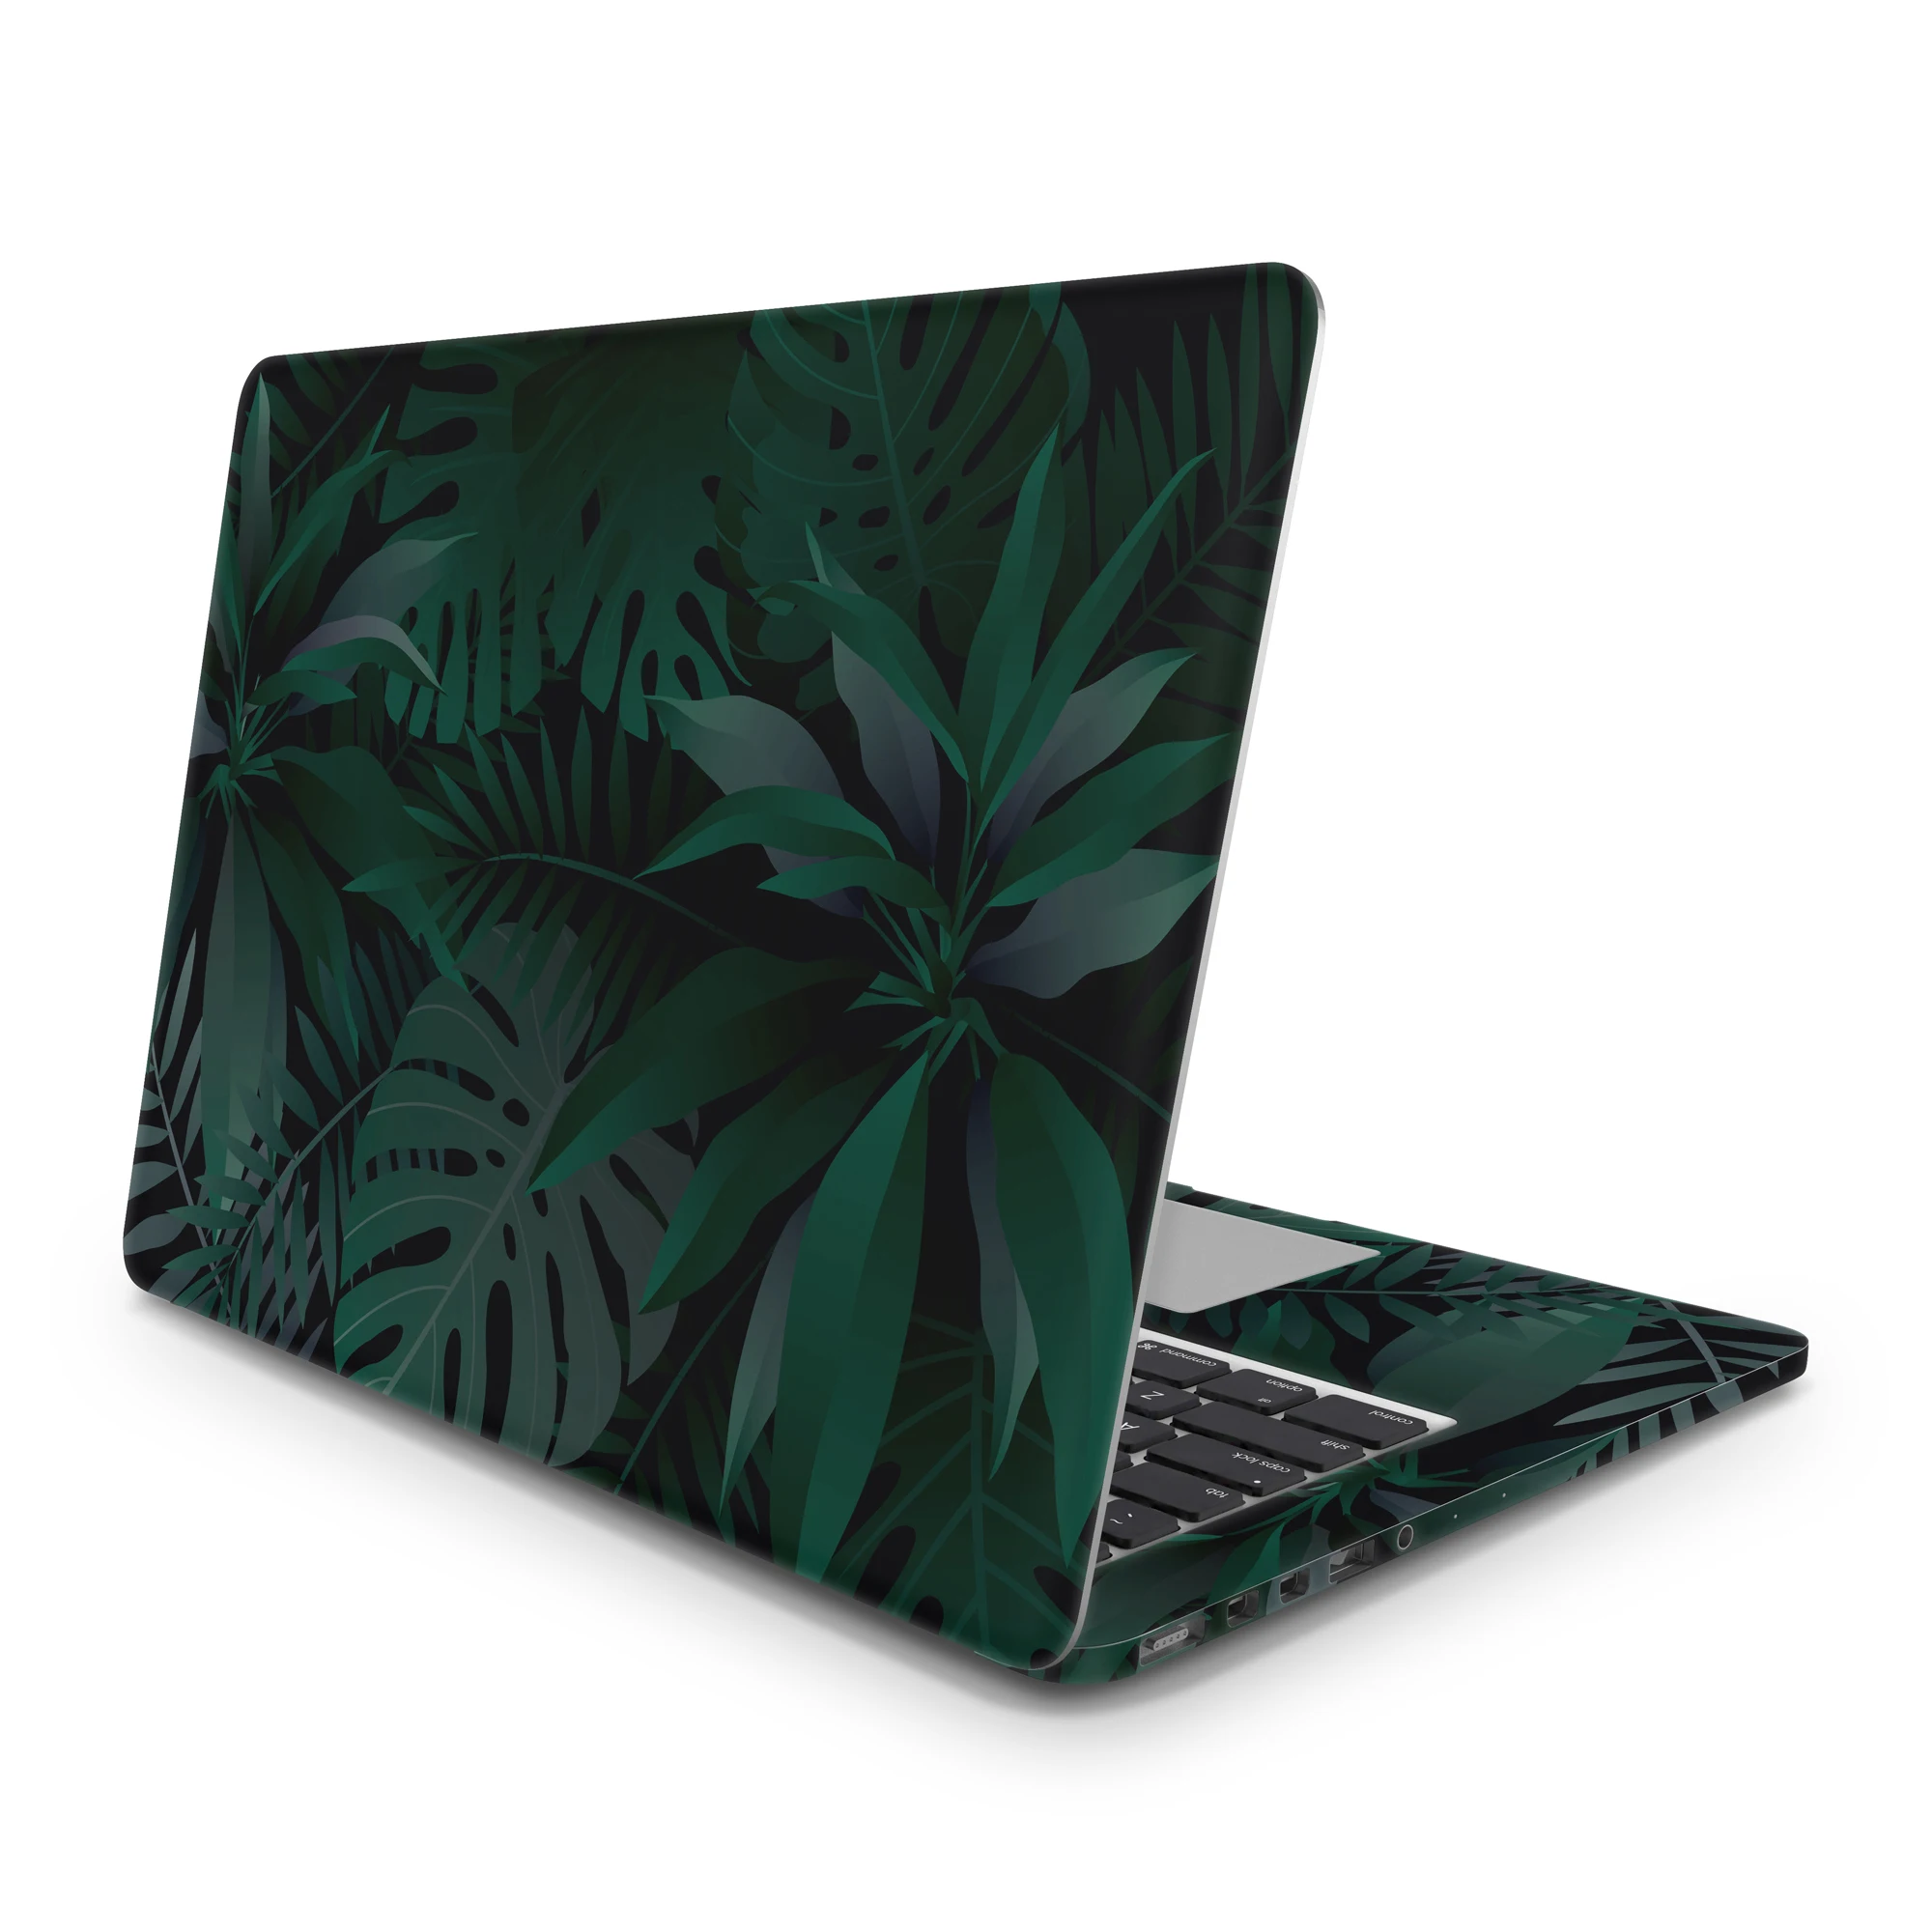 

Sticker Master Monochrome Green Laptop Vinyl Sticker Skin Cover For 10 12 13 14 15.4 15.6 16 17 19 " Inc Notebook Decal For Macbook,Asus,Acer,Hp,Lenovo,Huawei,Dell,Msi,Apple,Toshiba,Compaq